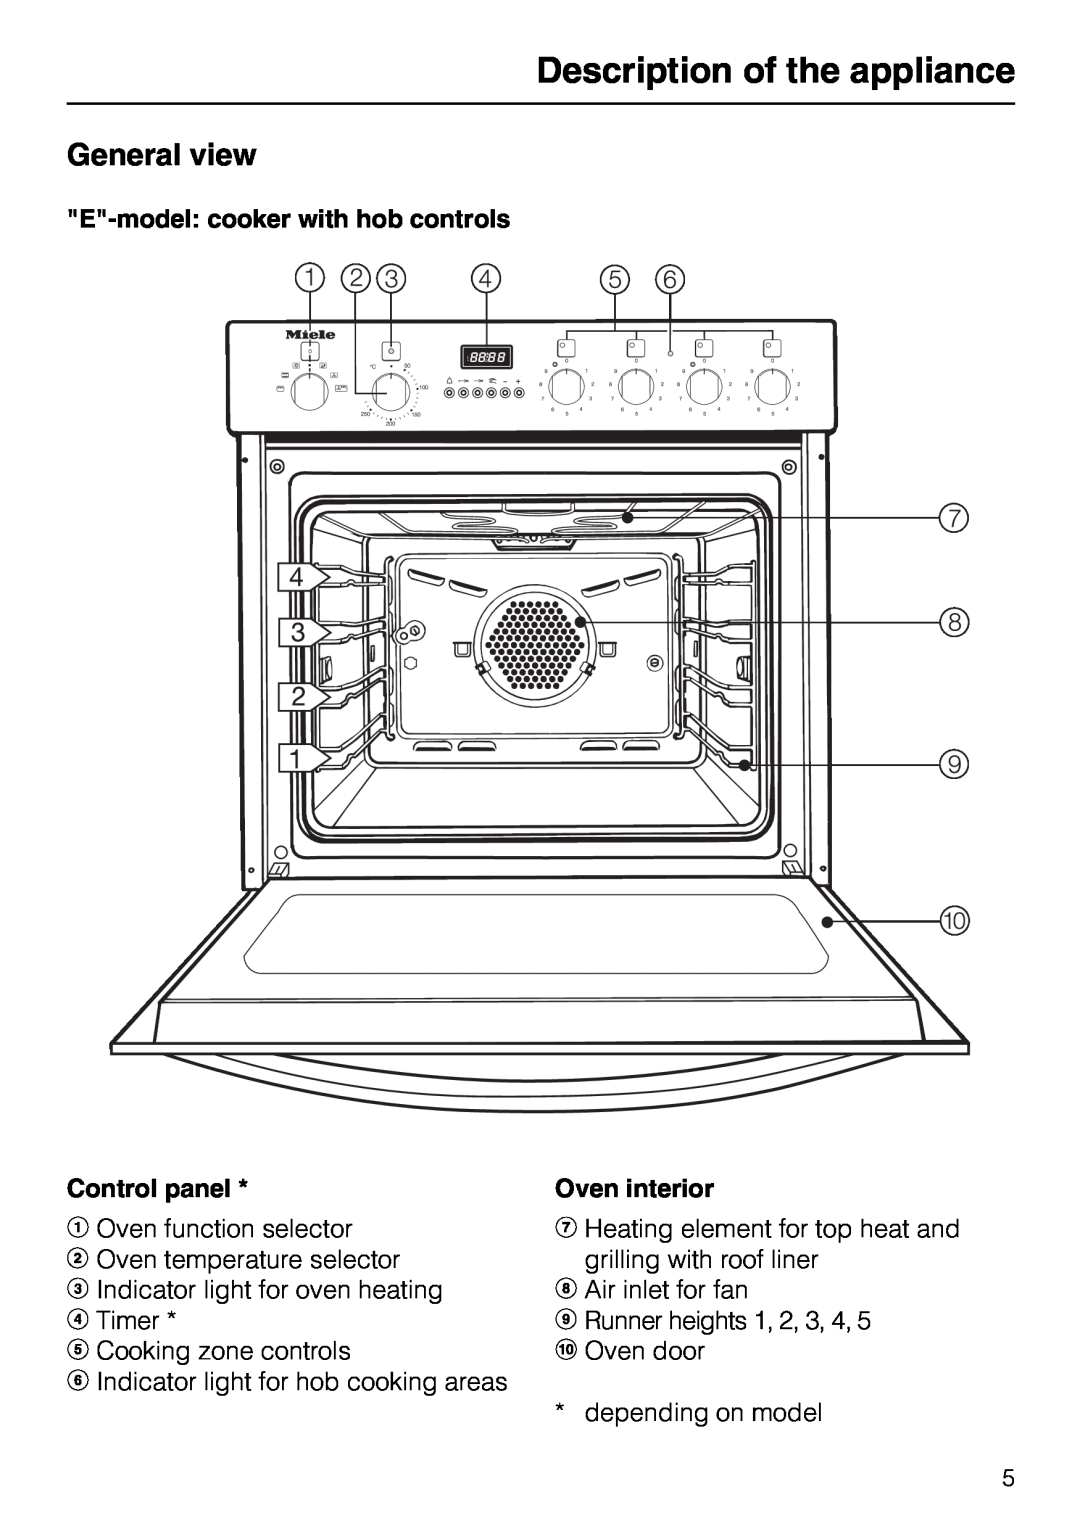 Miele H 316 Description of the appliance, General view, E-model cooker with hob controls, Control panel, Oven interior 